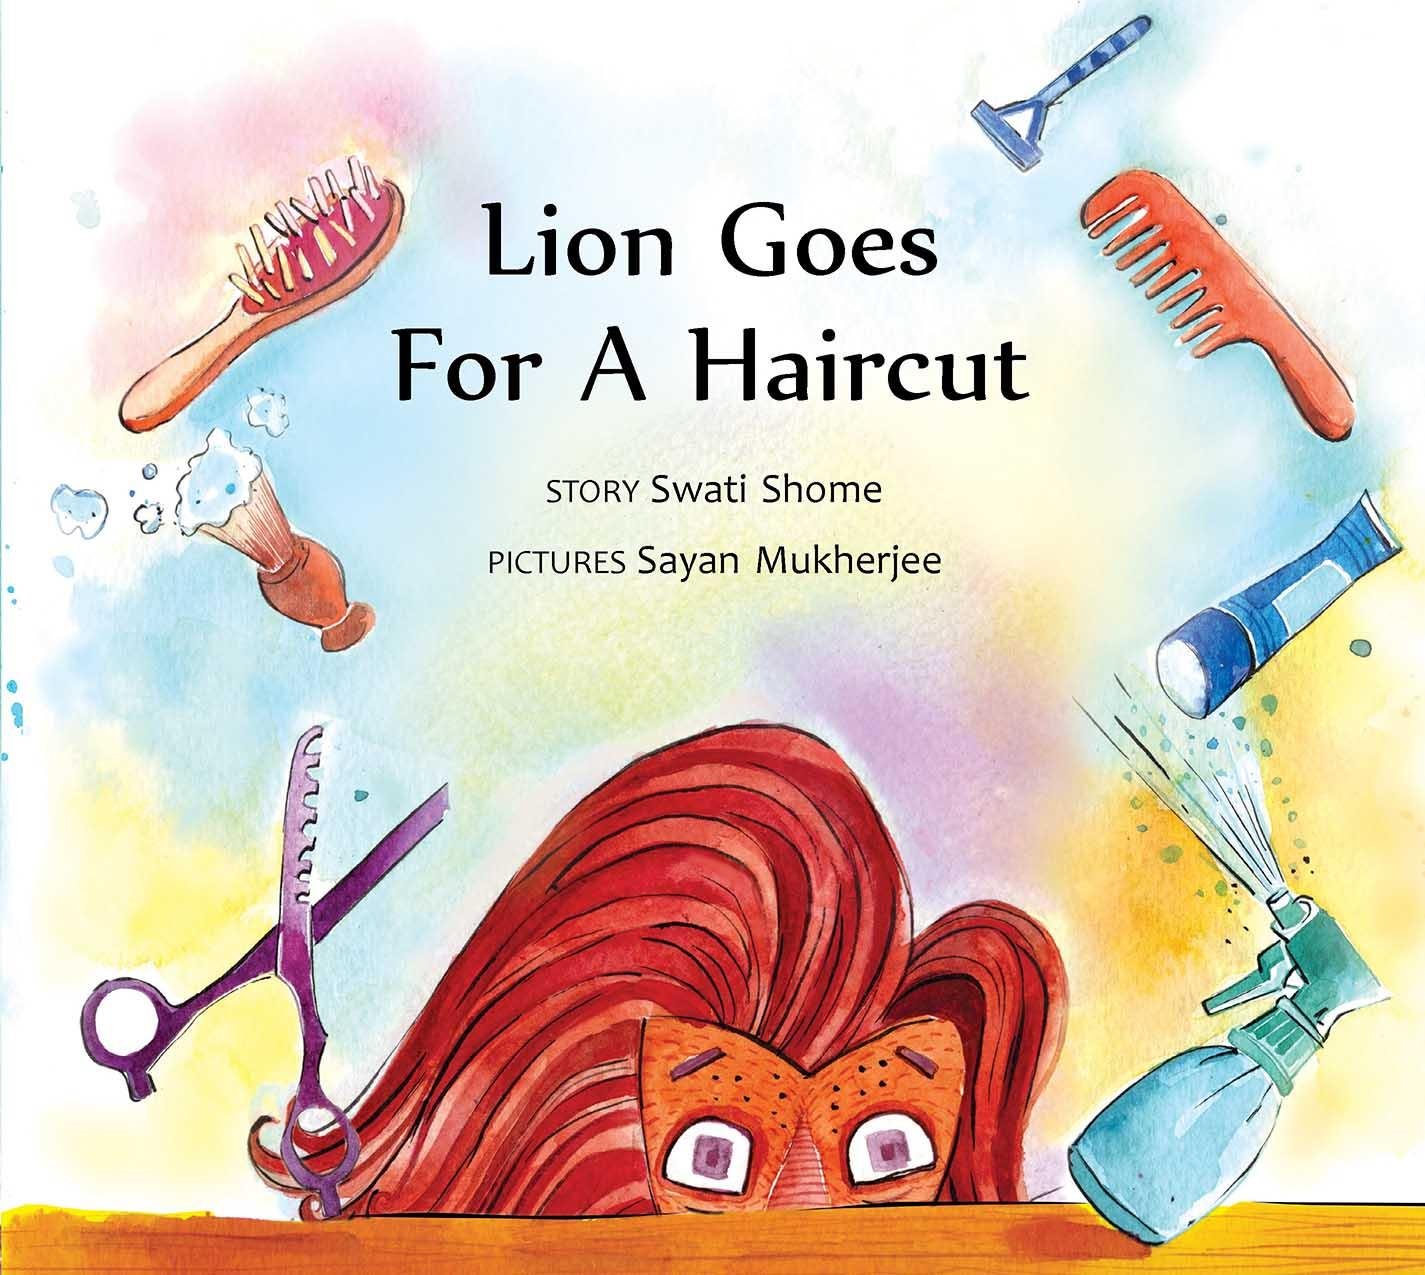 IMG : Lion goes for a Haircut